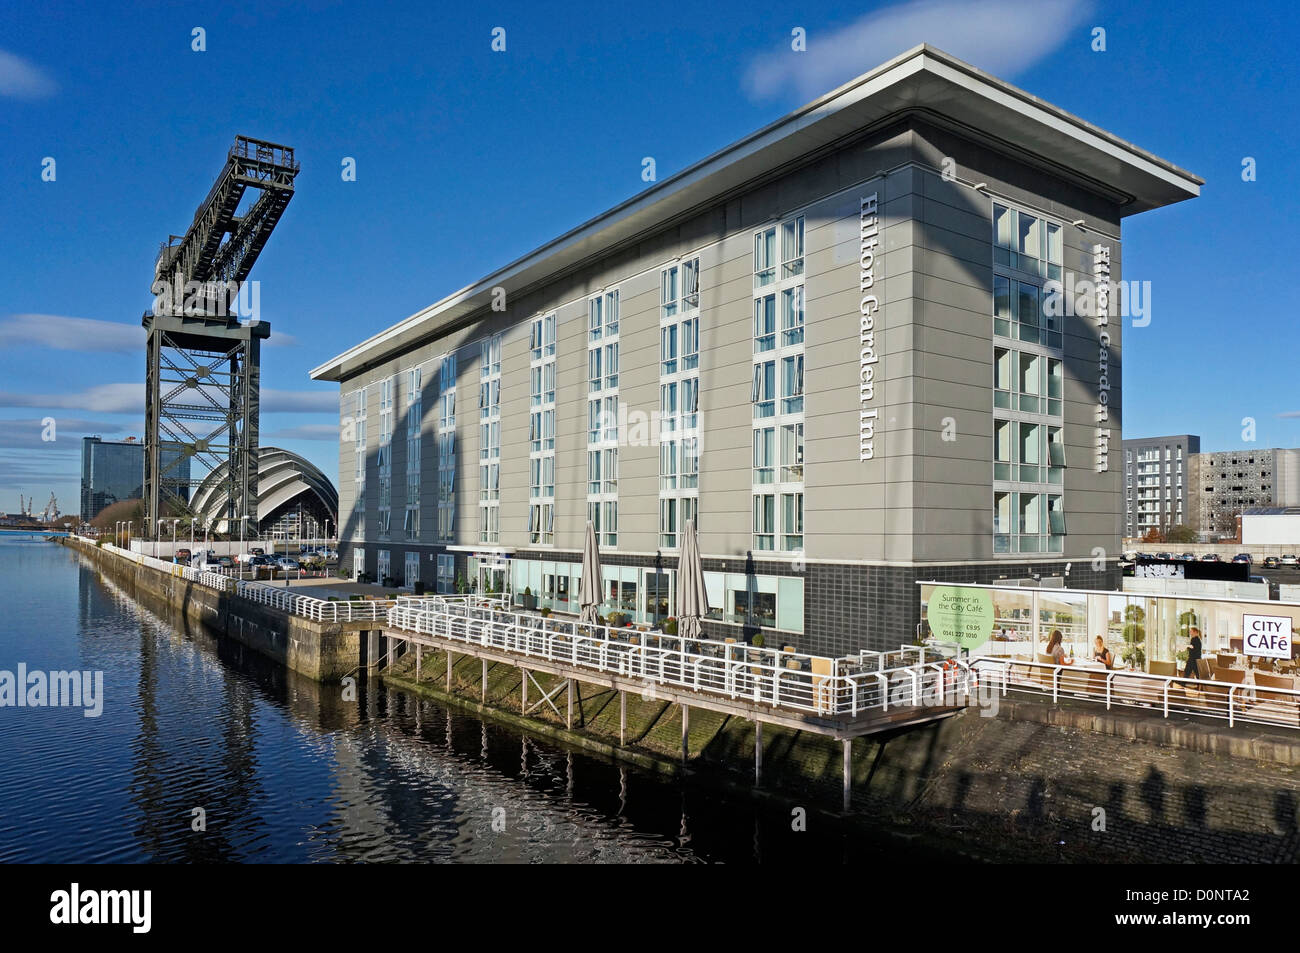 Hilton Garden Inn at the River Clyde in Glasgow with Finnieston Crane and Clyde Auditorium on a sunny autumn day Stock Photo